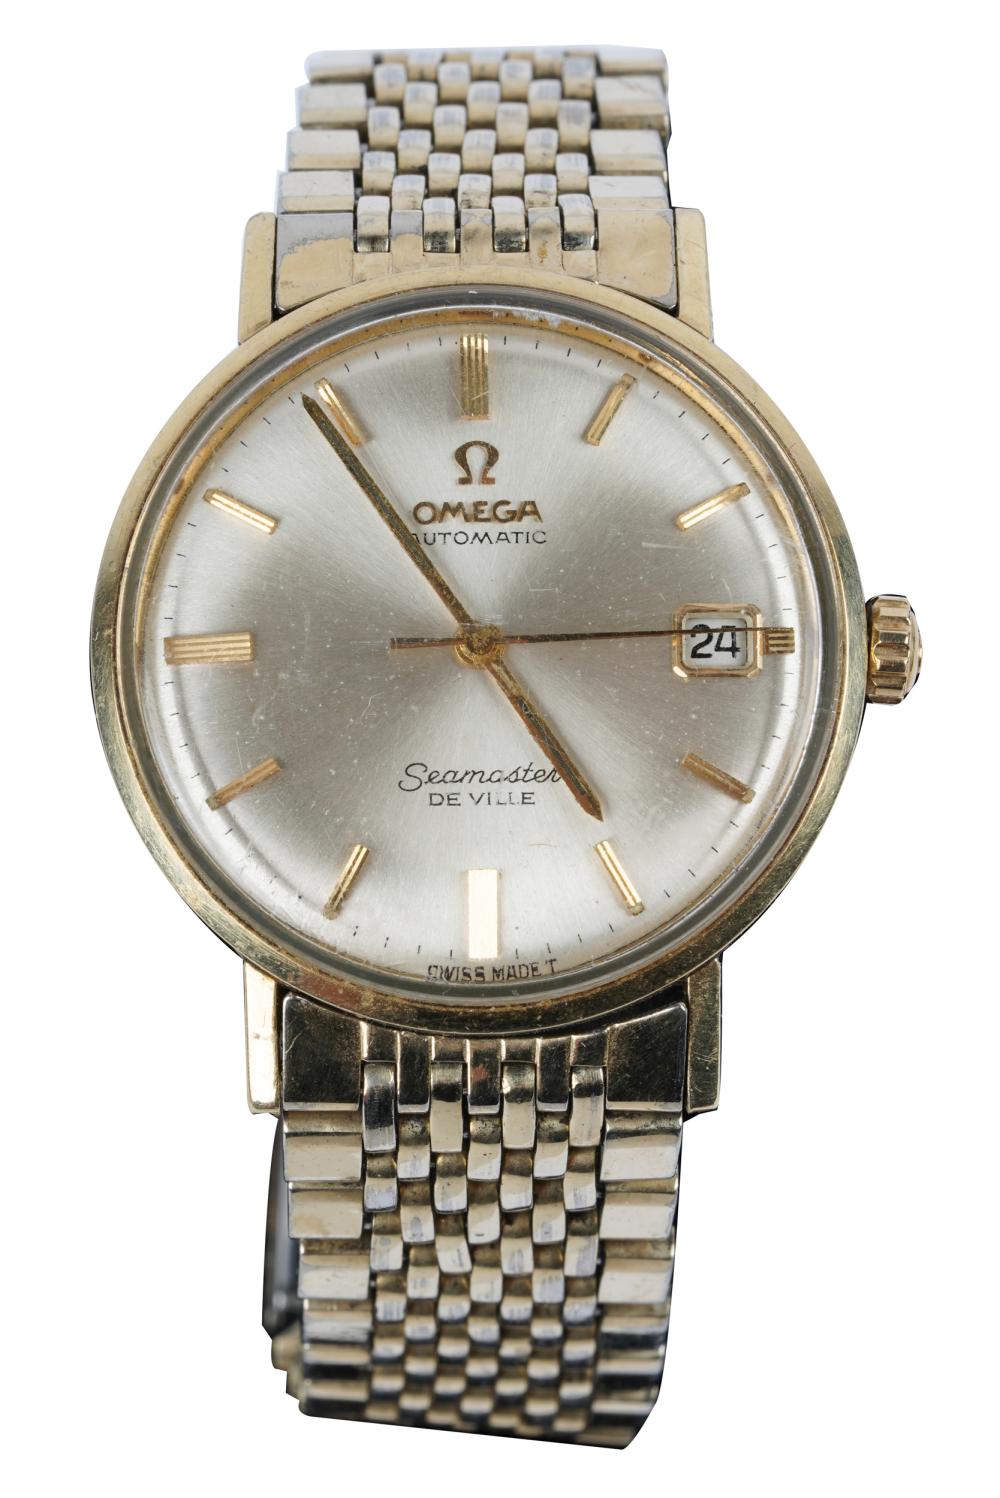 OMEGA GOLD PLATE SEAMASTER WATCHthe 333d6a